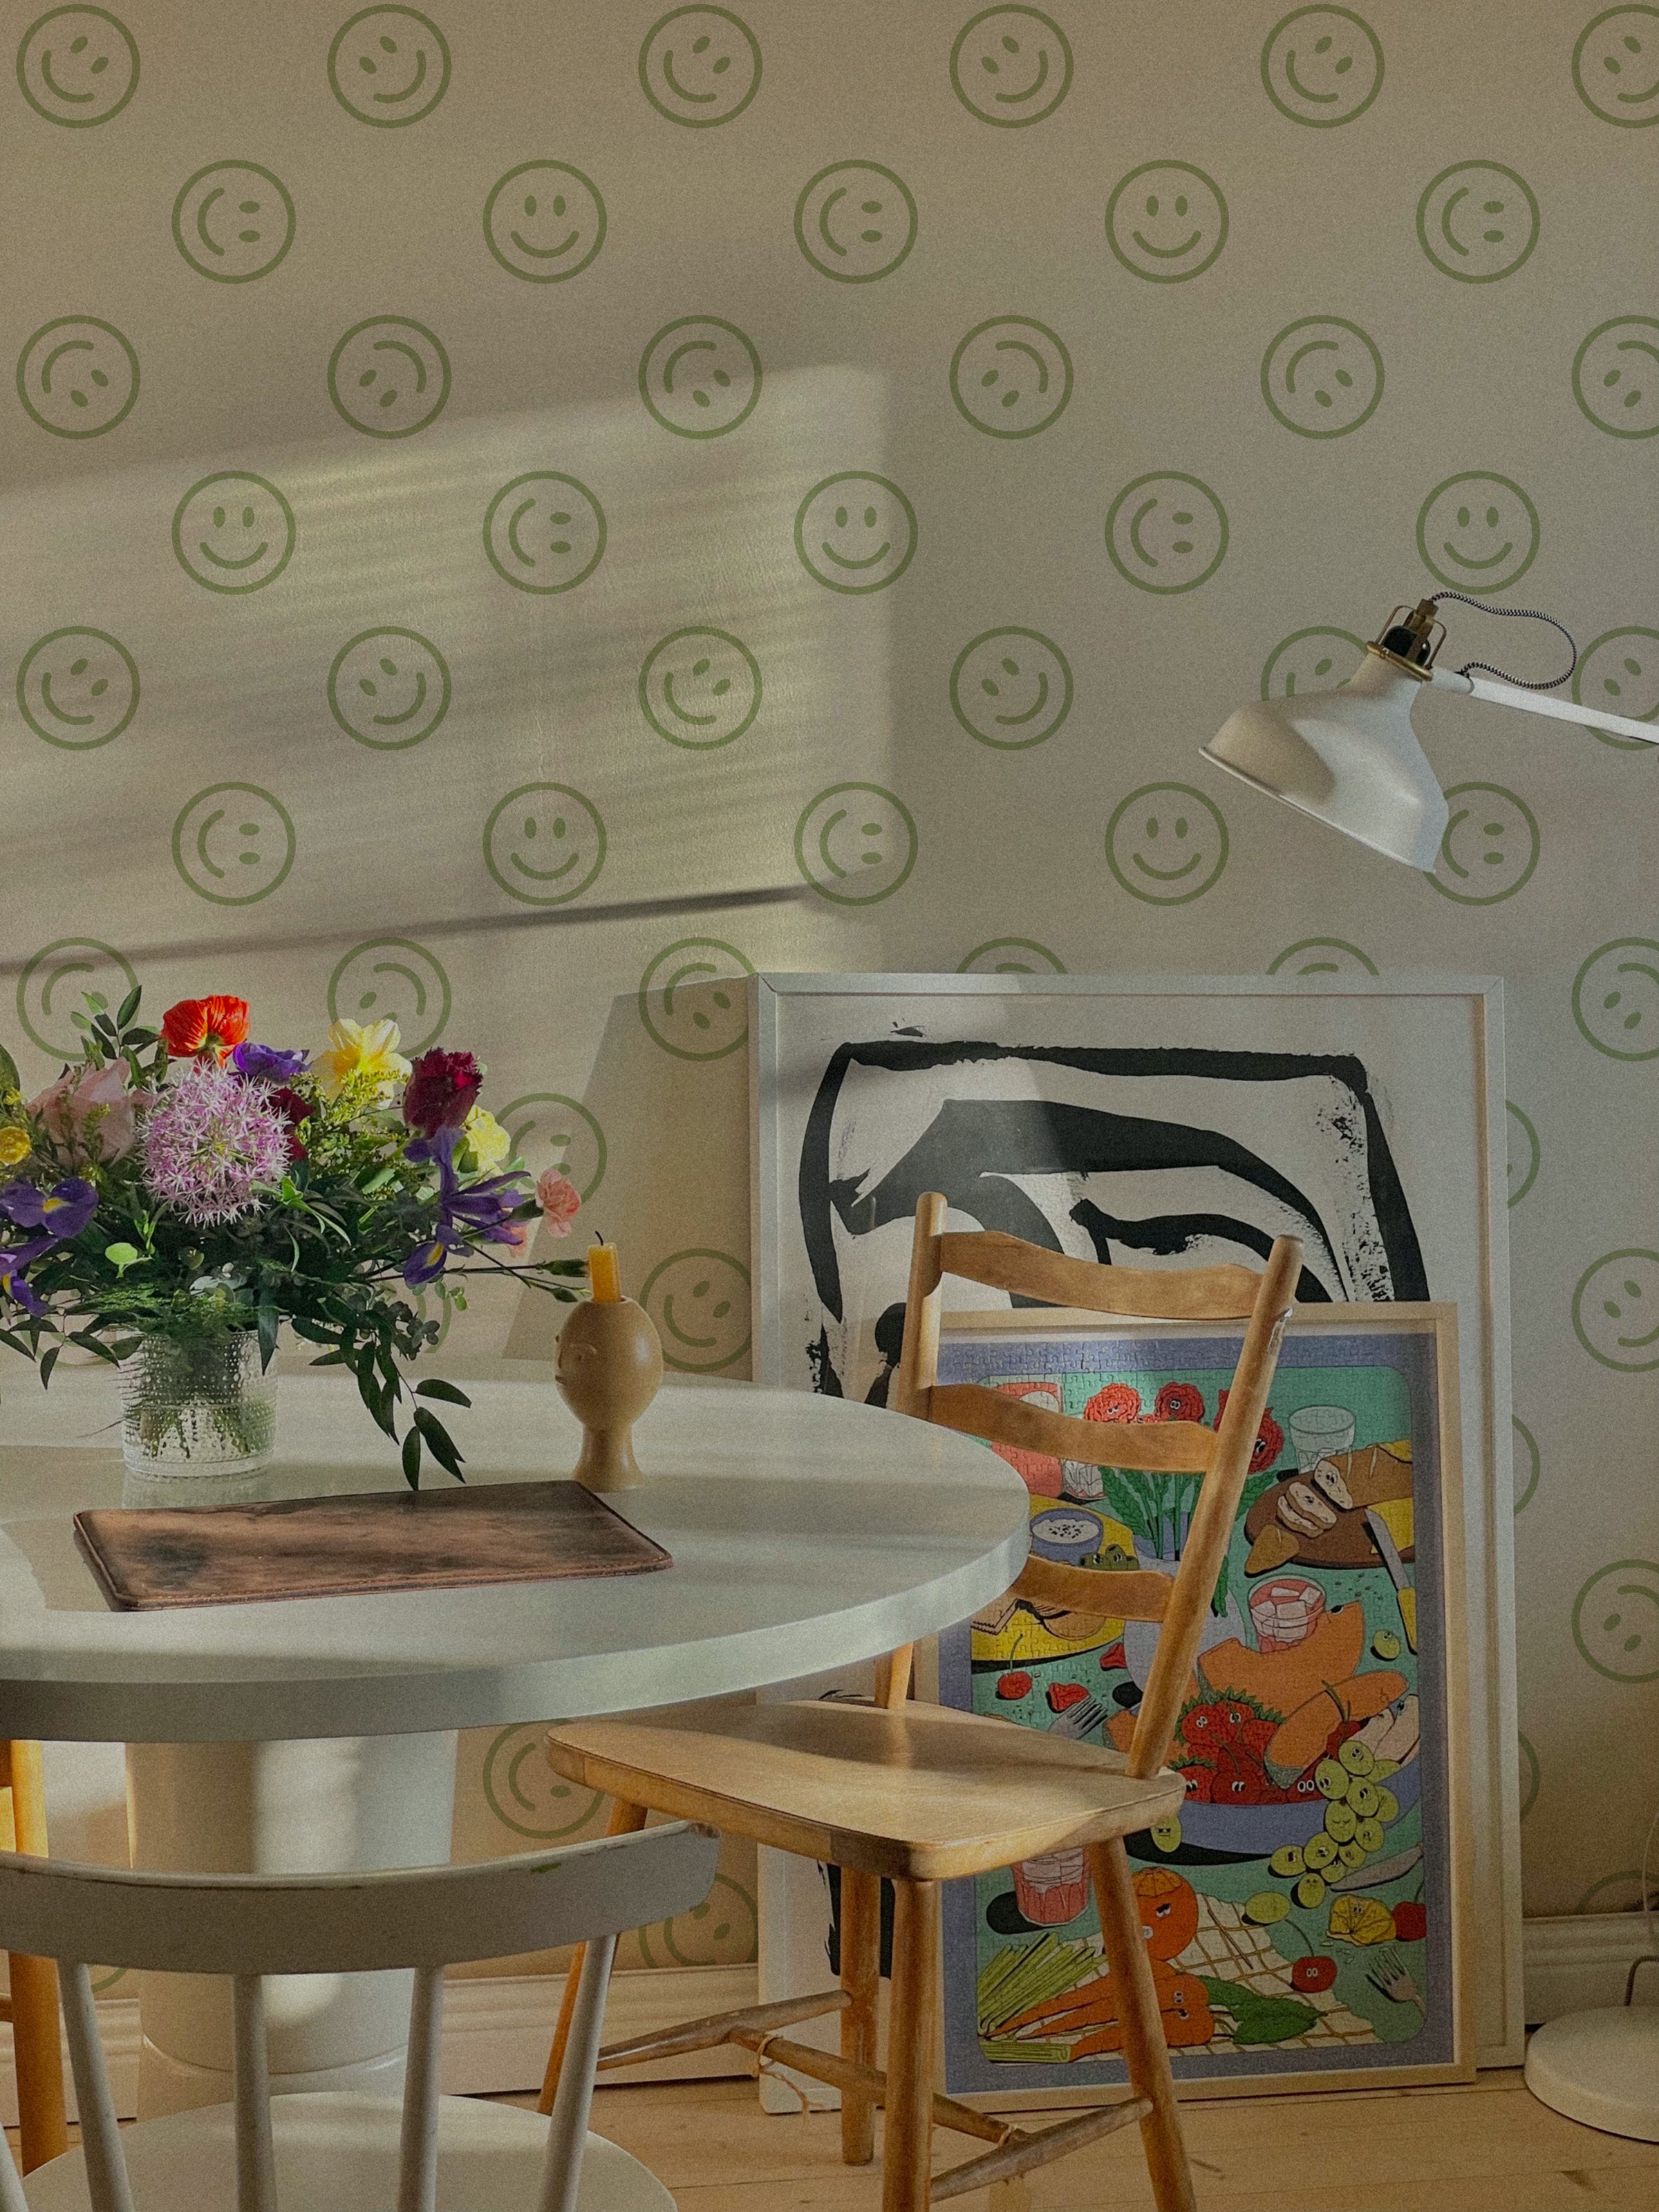 A cozy dining area featuring Smiley Wallpaper with green smiley faces on a light background. The space is decorated with a round white table, wooden chairs, colorful flowers, and framed artwork.